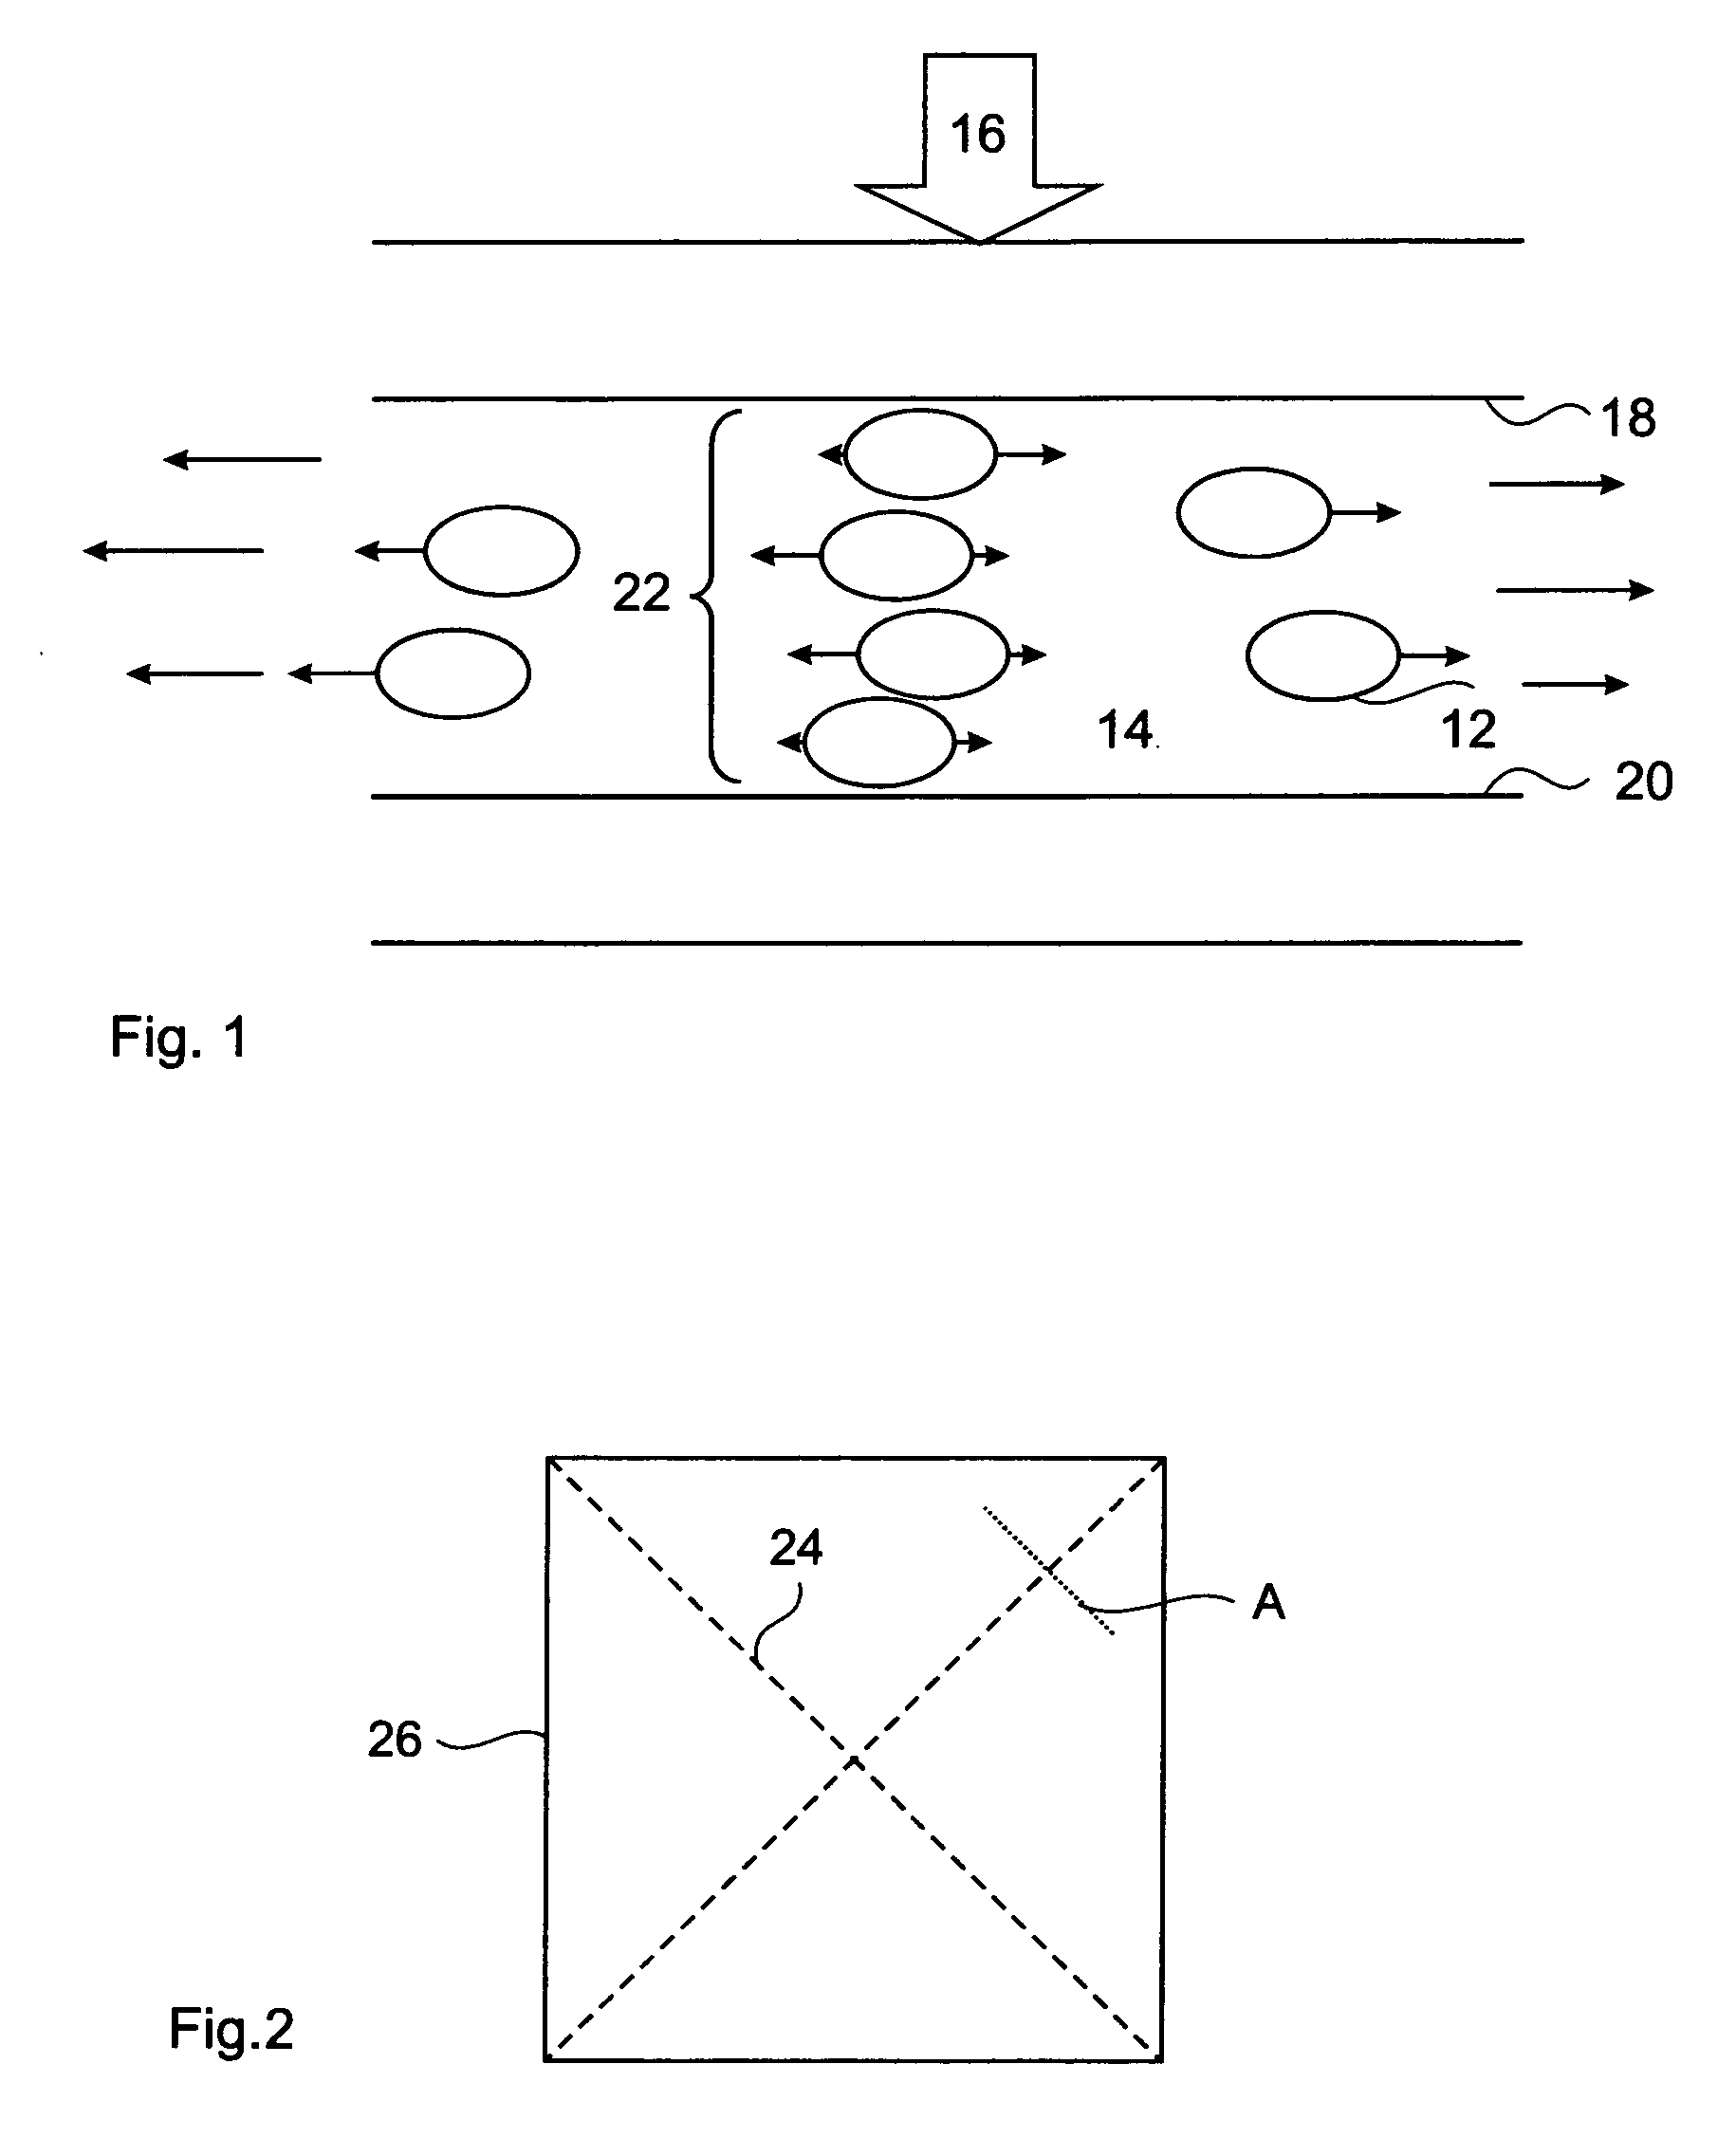 Thermal interface with a patterned structure